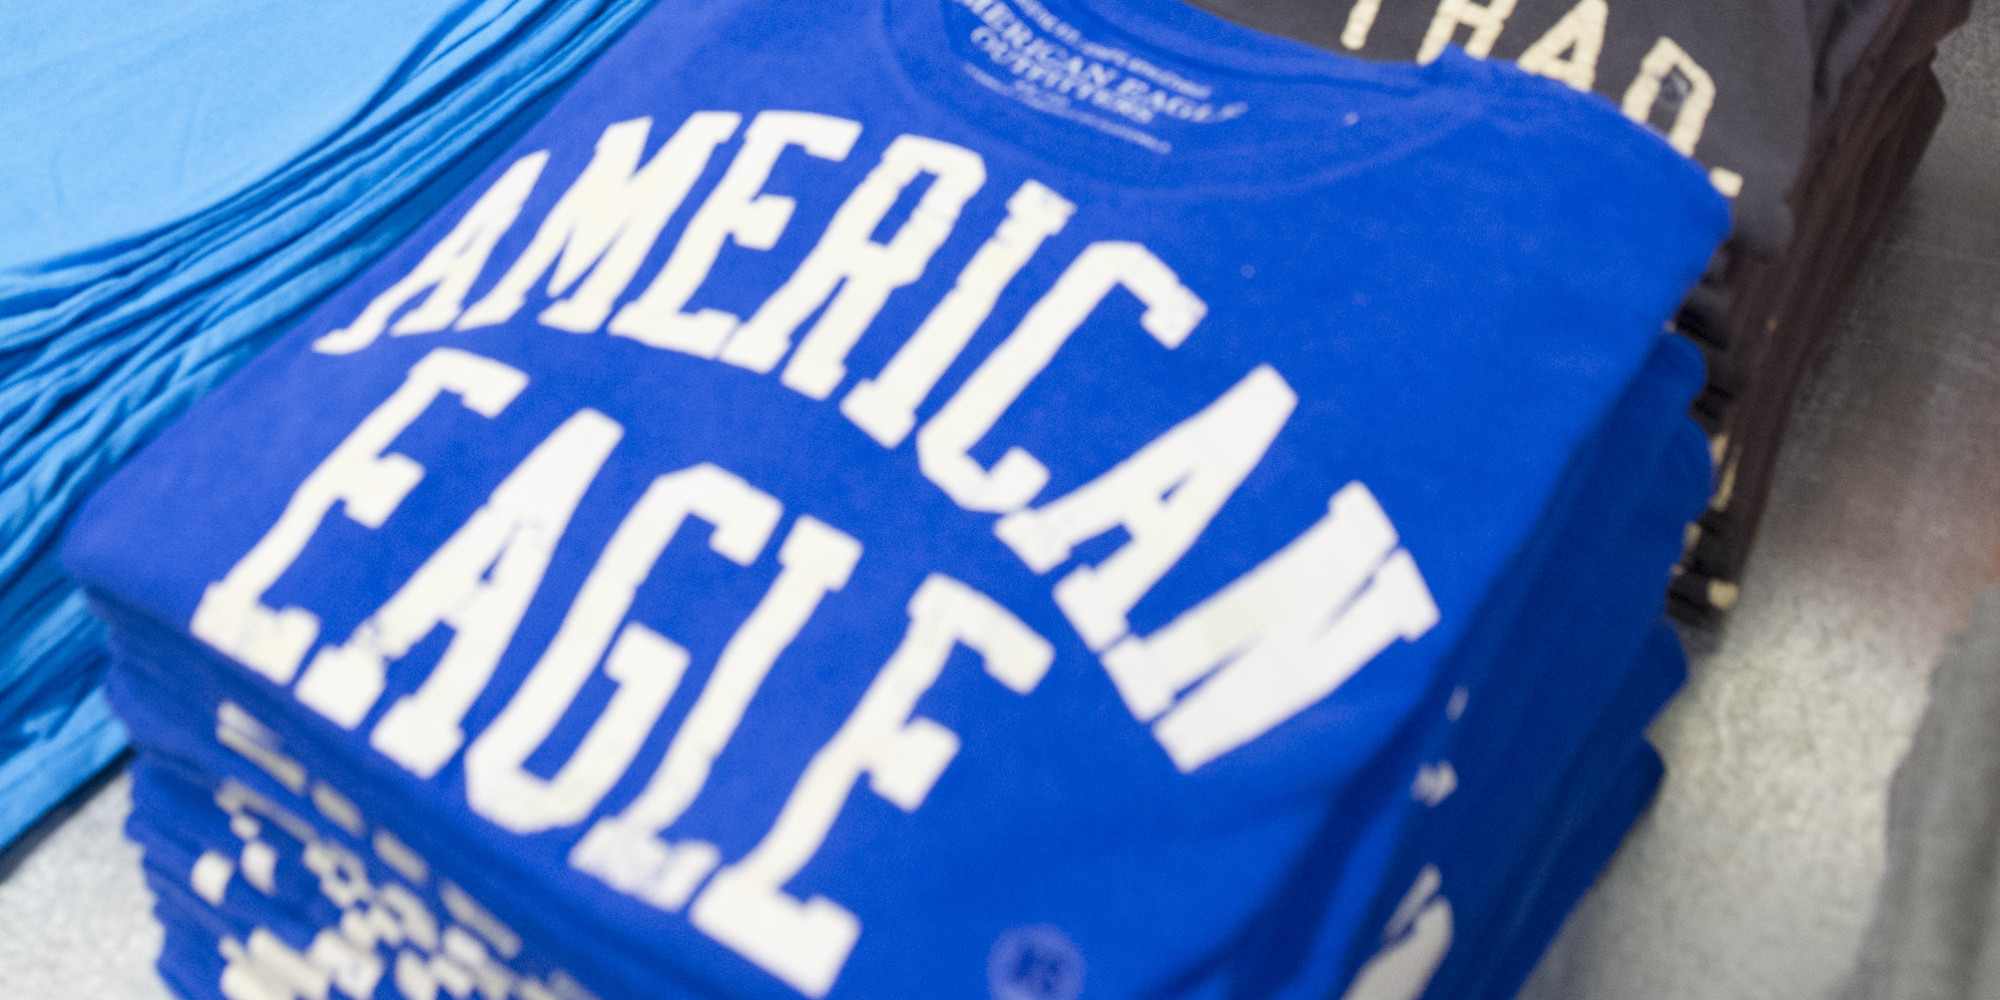 Robert Hanson Out As CEO Of American Eagle